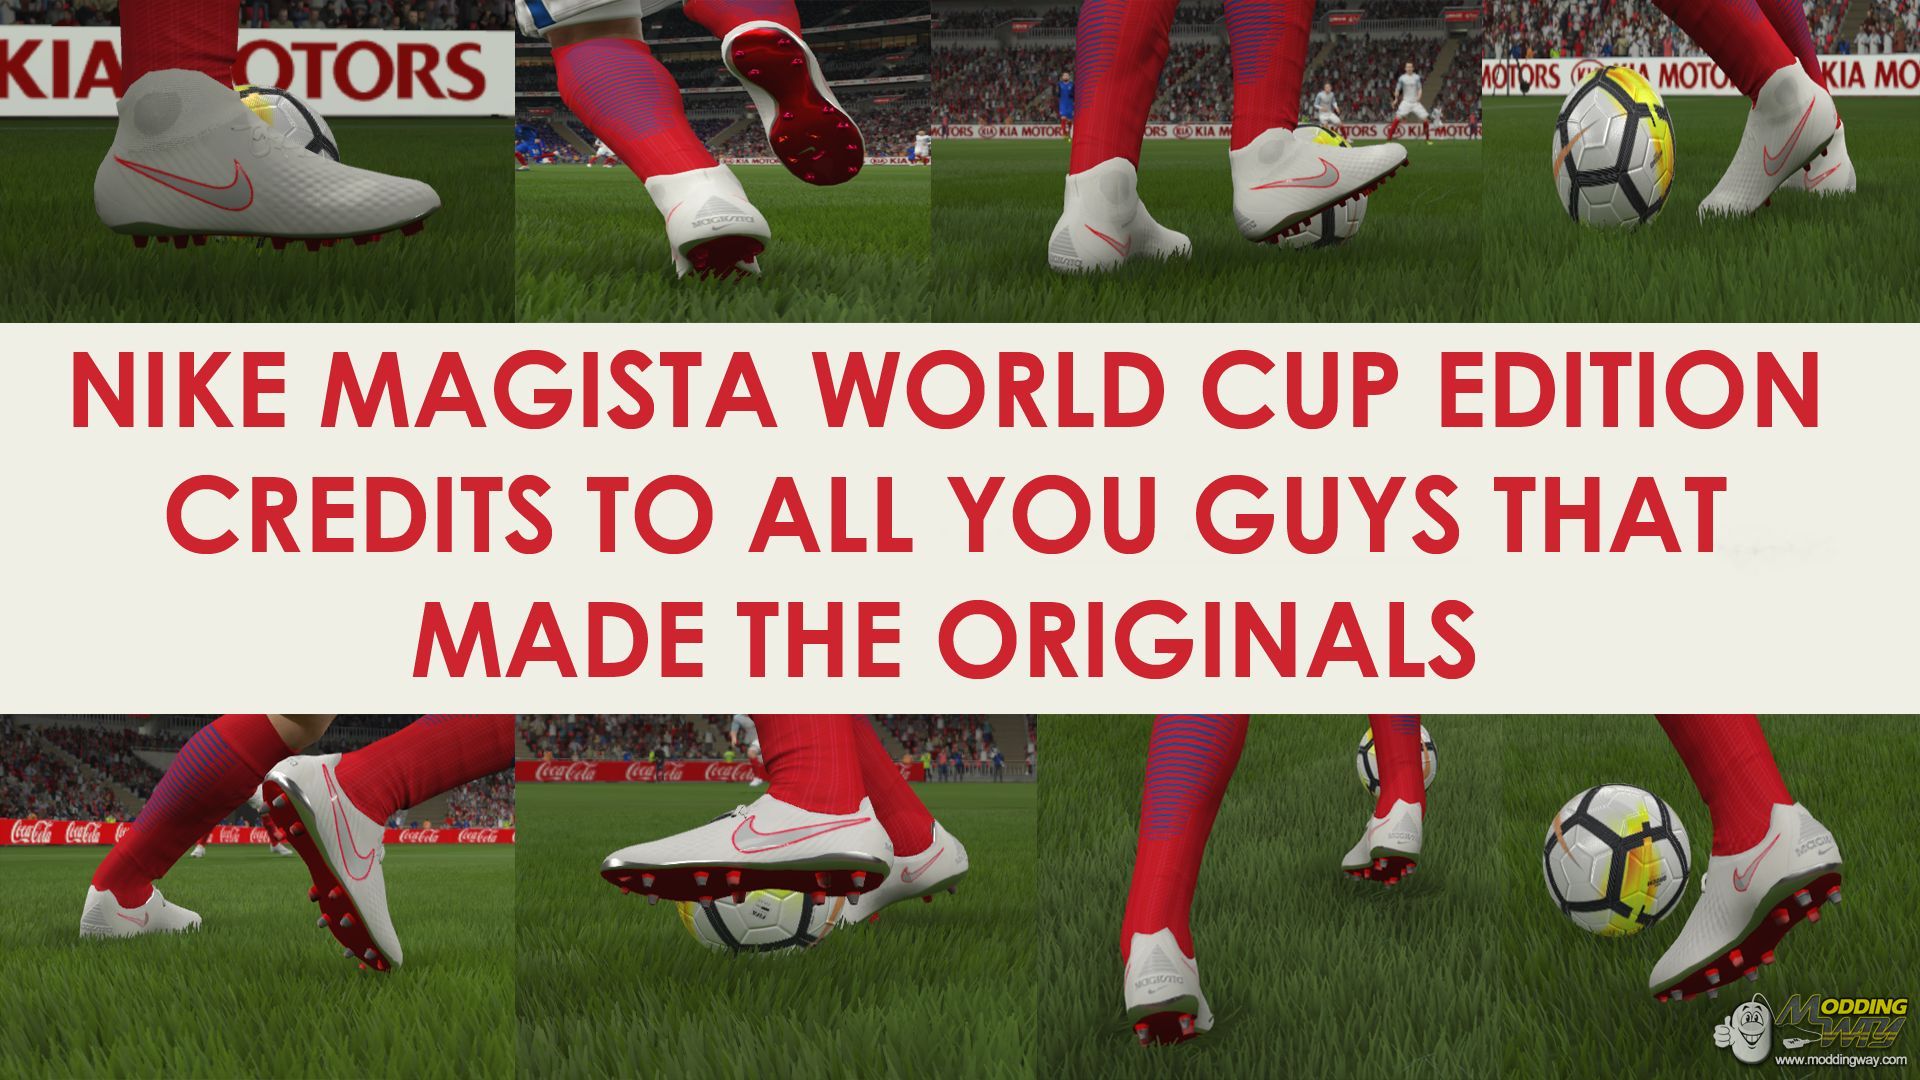 Grease Peruse To read Nike magista World Cup 2018 Edition - FIFA 16 at ModdingWay